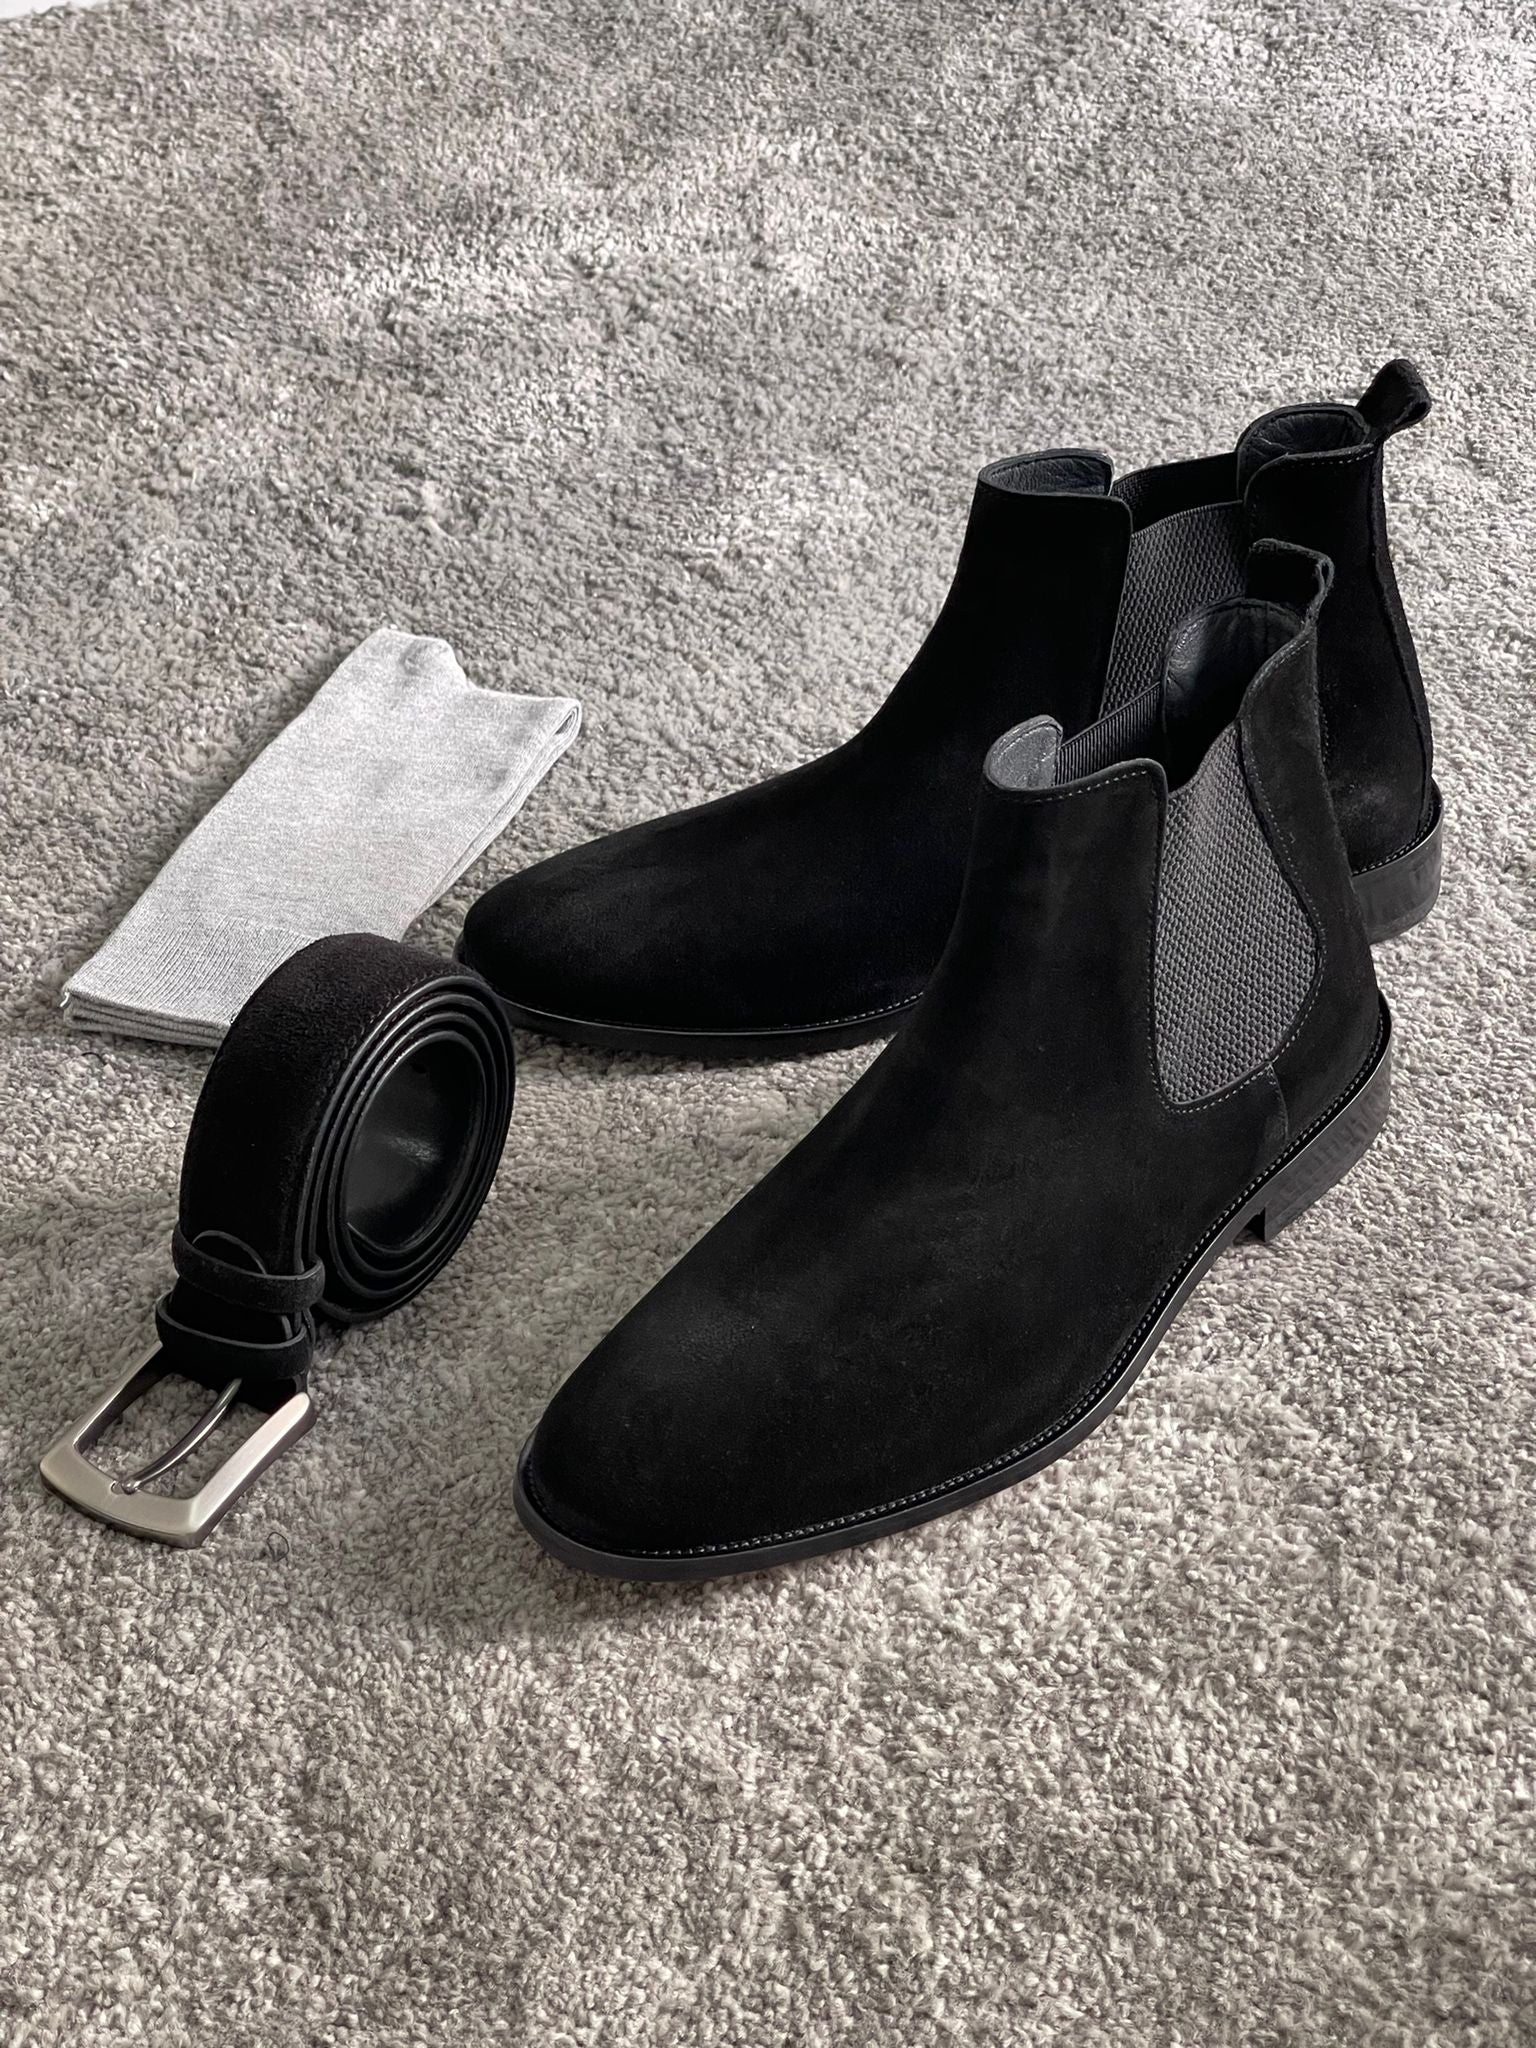 Chesterfield Special Edition Black Leather Chelsea Boots – MCR TAILOR